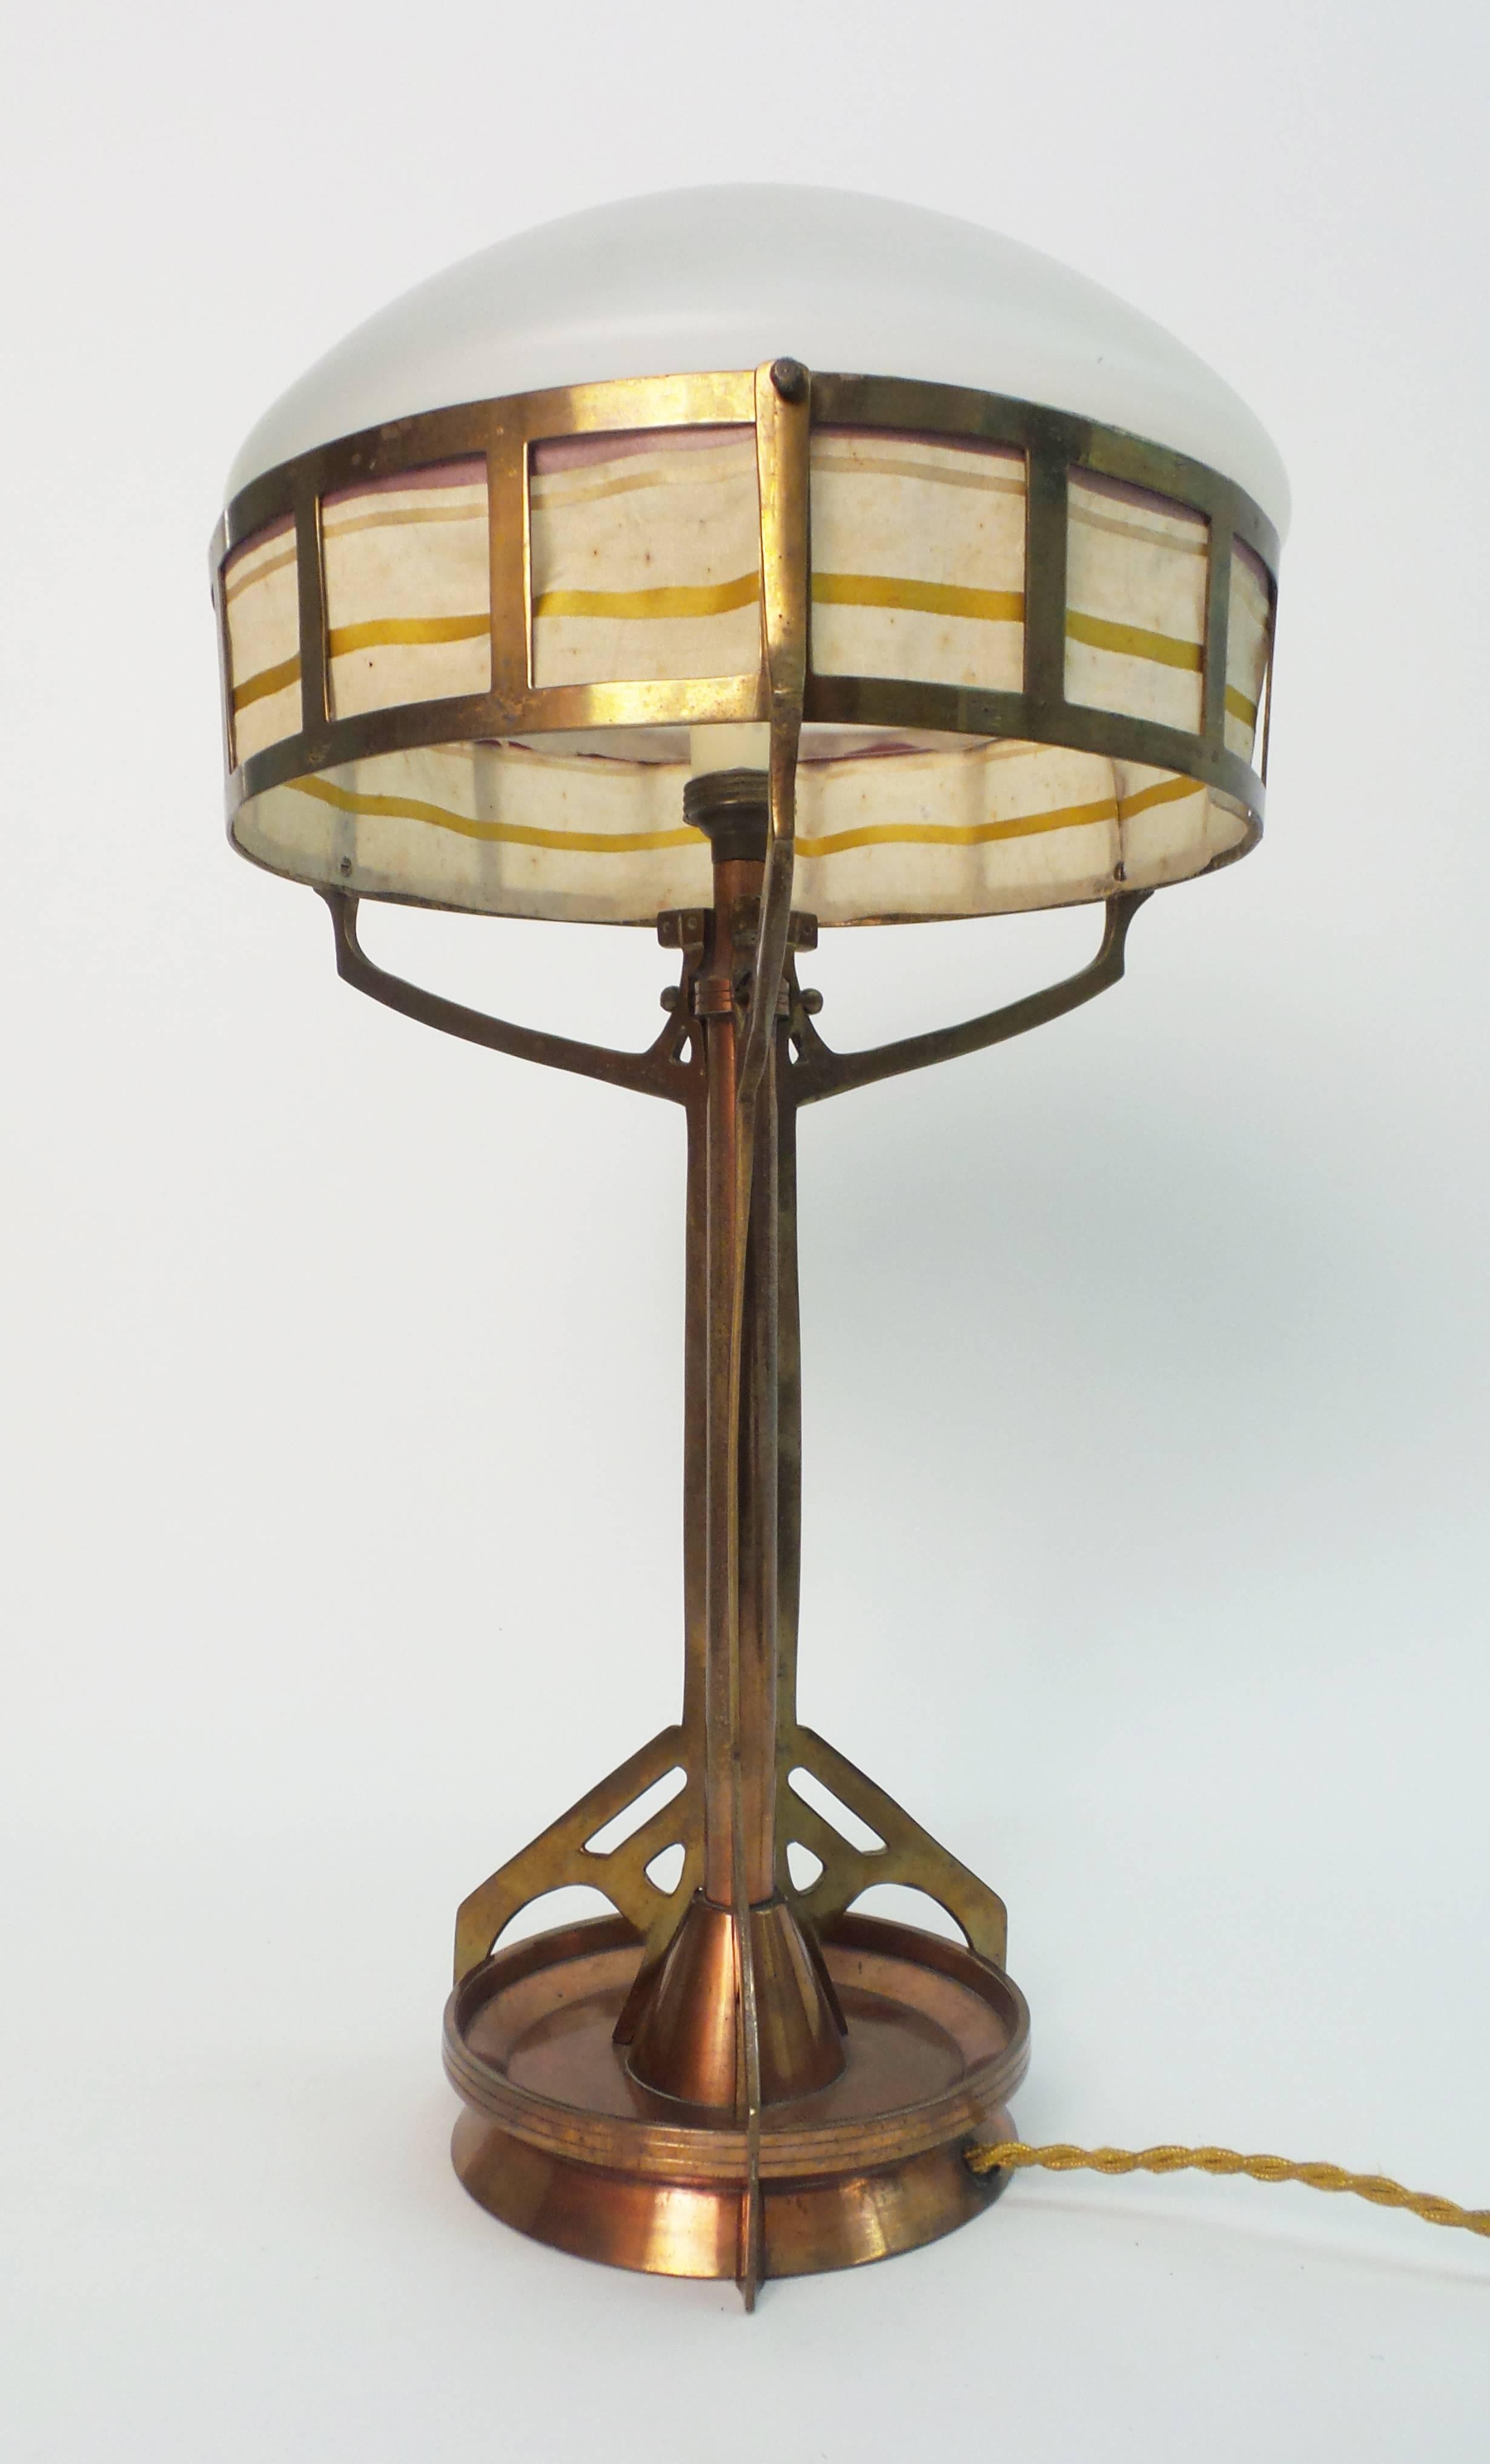 Jugendstil Period Table Lamp In Excellent Condition For Sale In Long Island City, NY